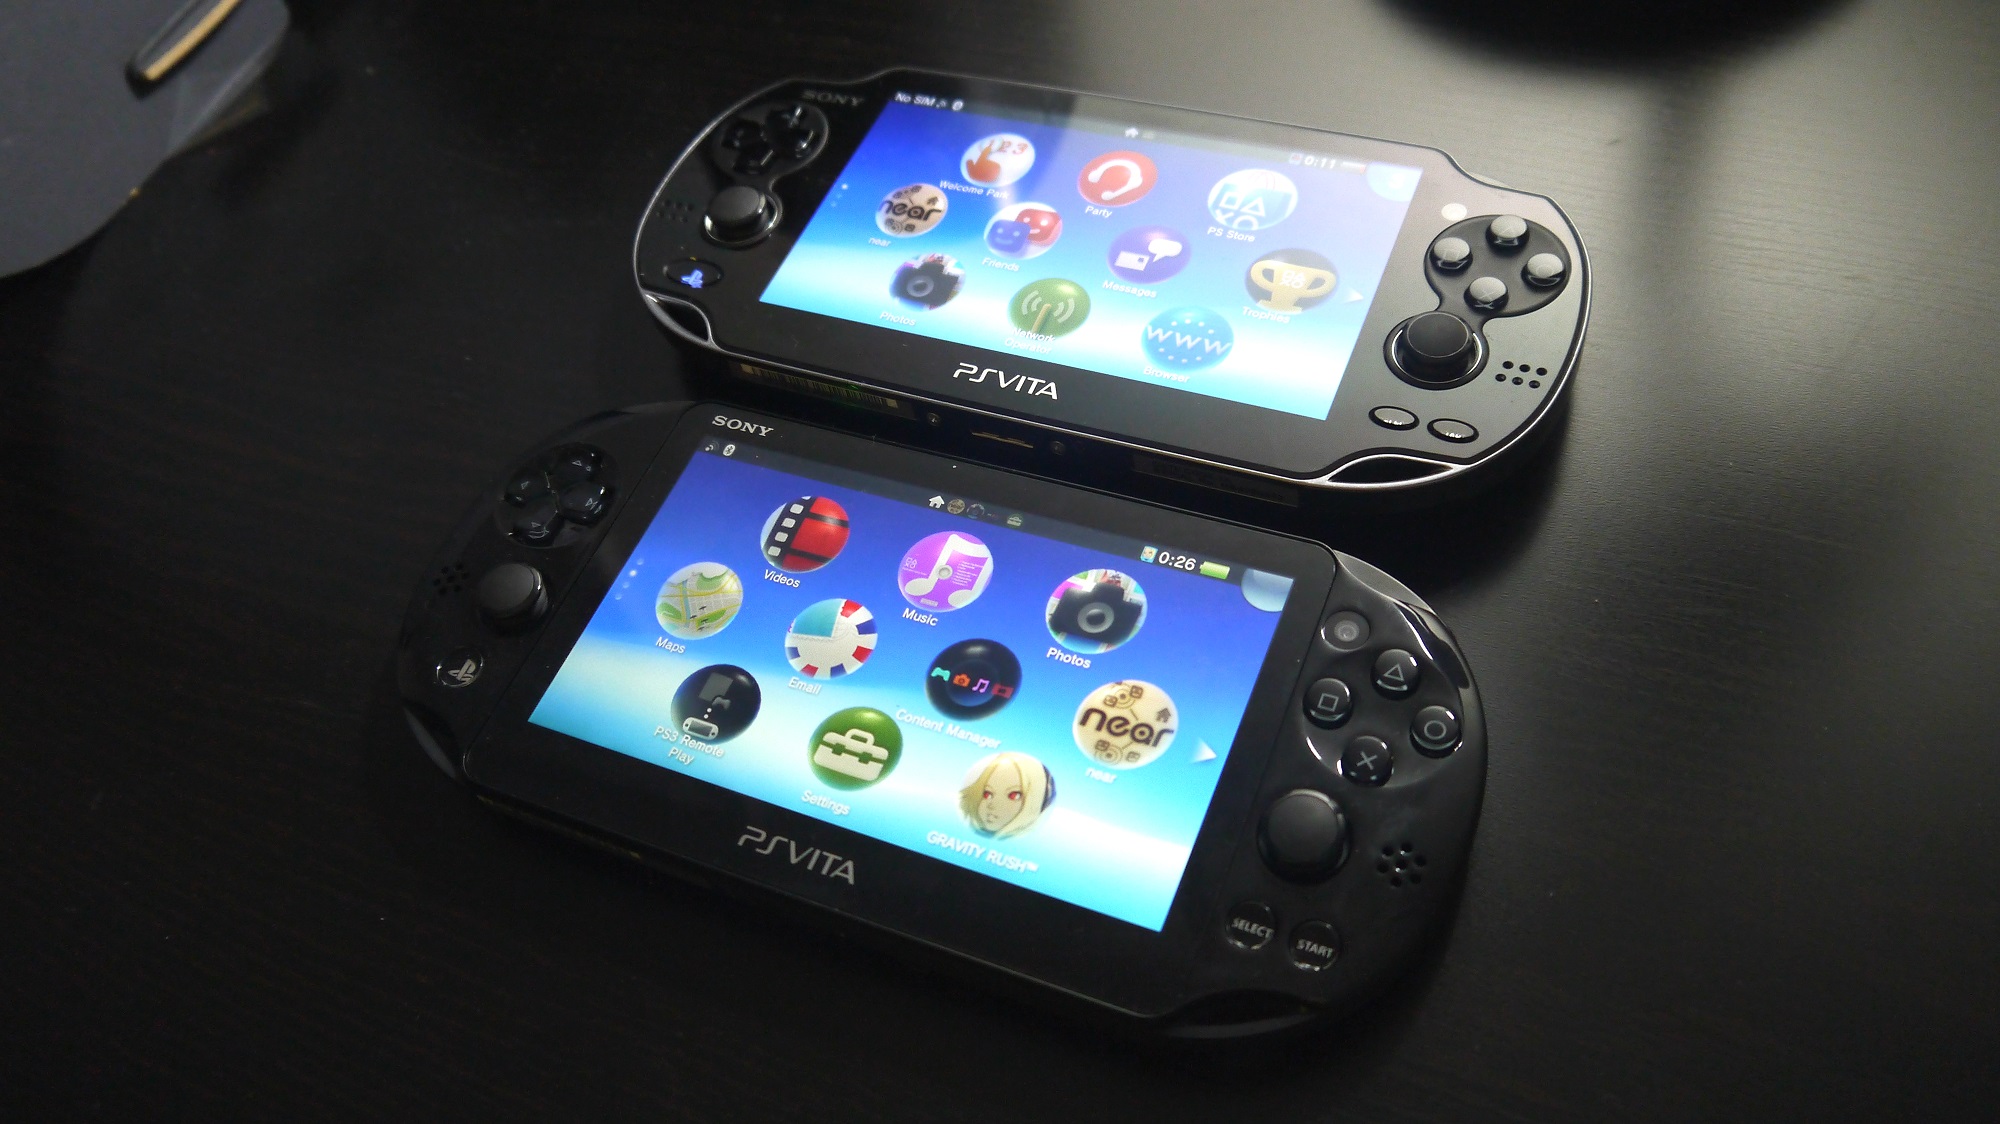 Buy a PlayStation Vita on the Bulletin board: Portable games on the go